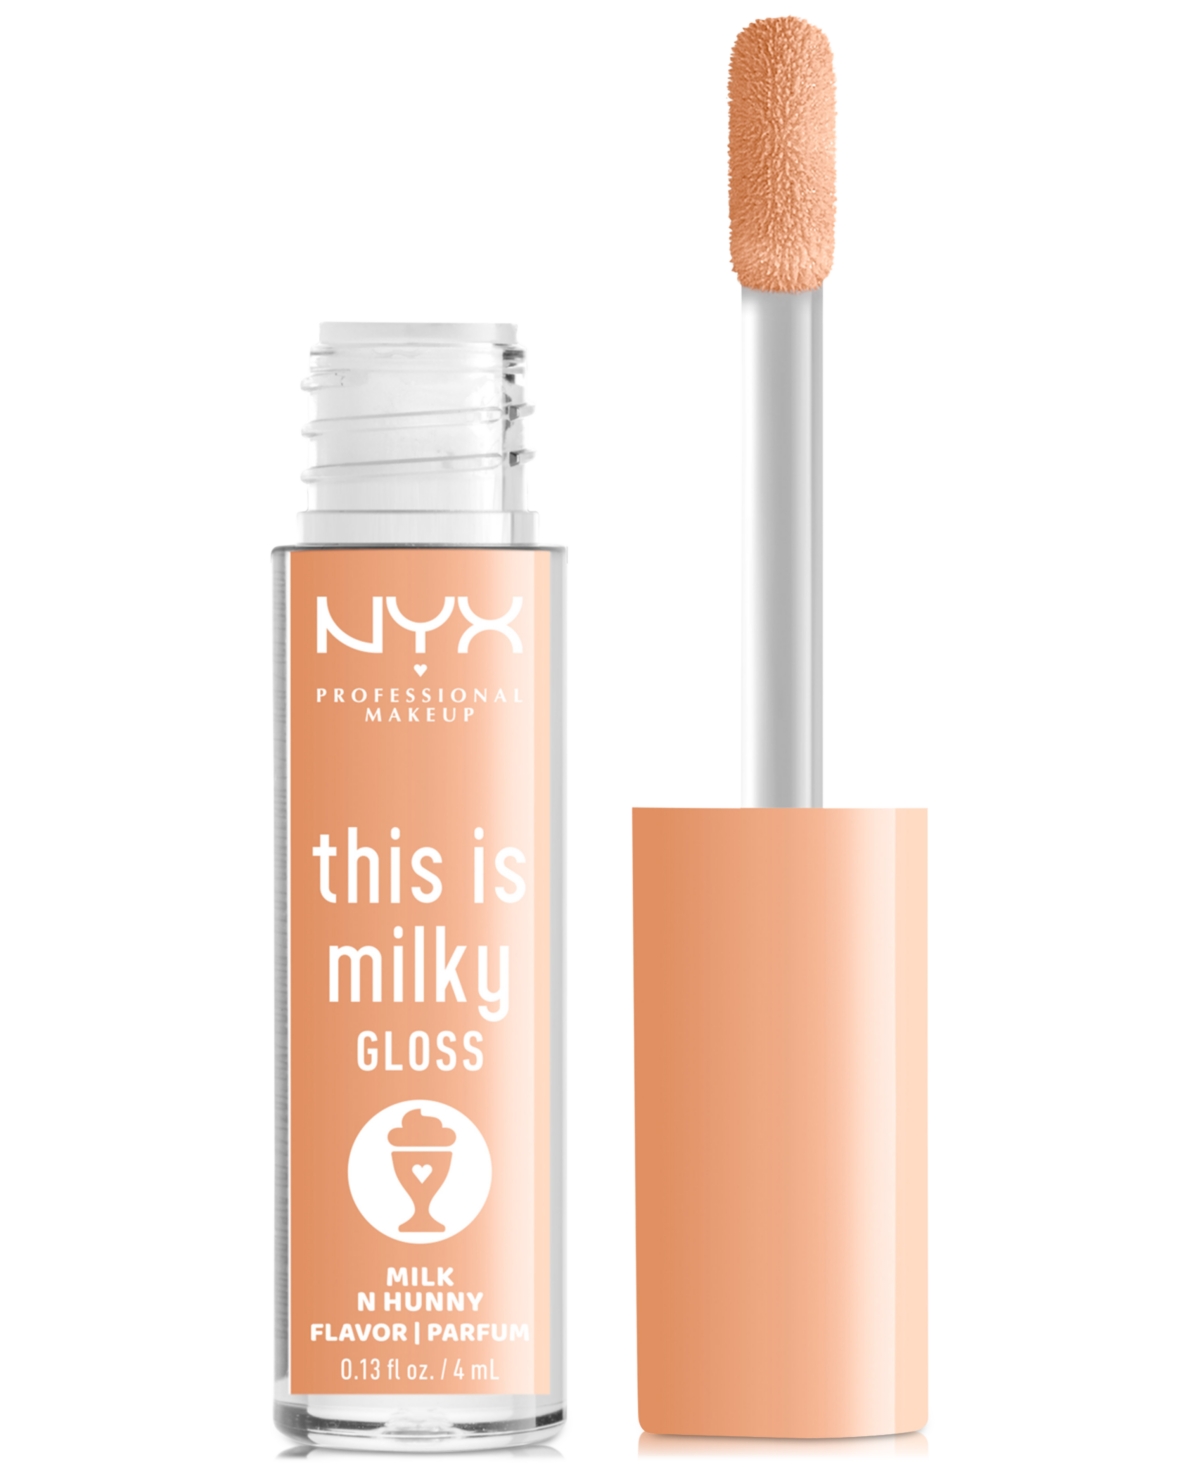 Nyx Professional Makeup This Is Milky Gloss In Milk N Hunny